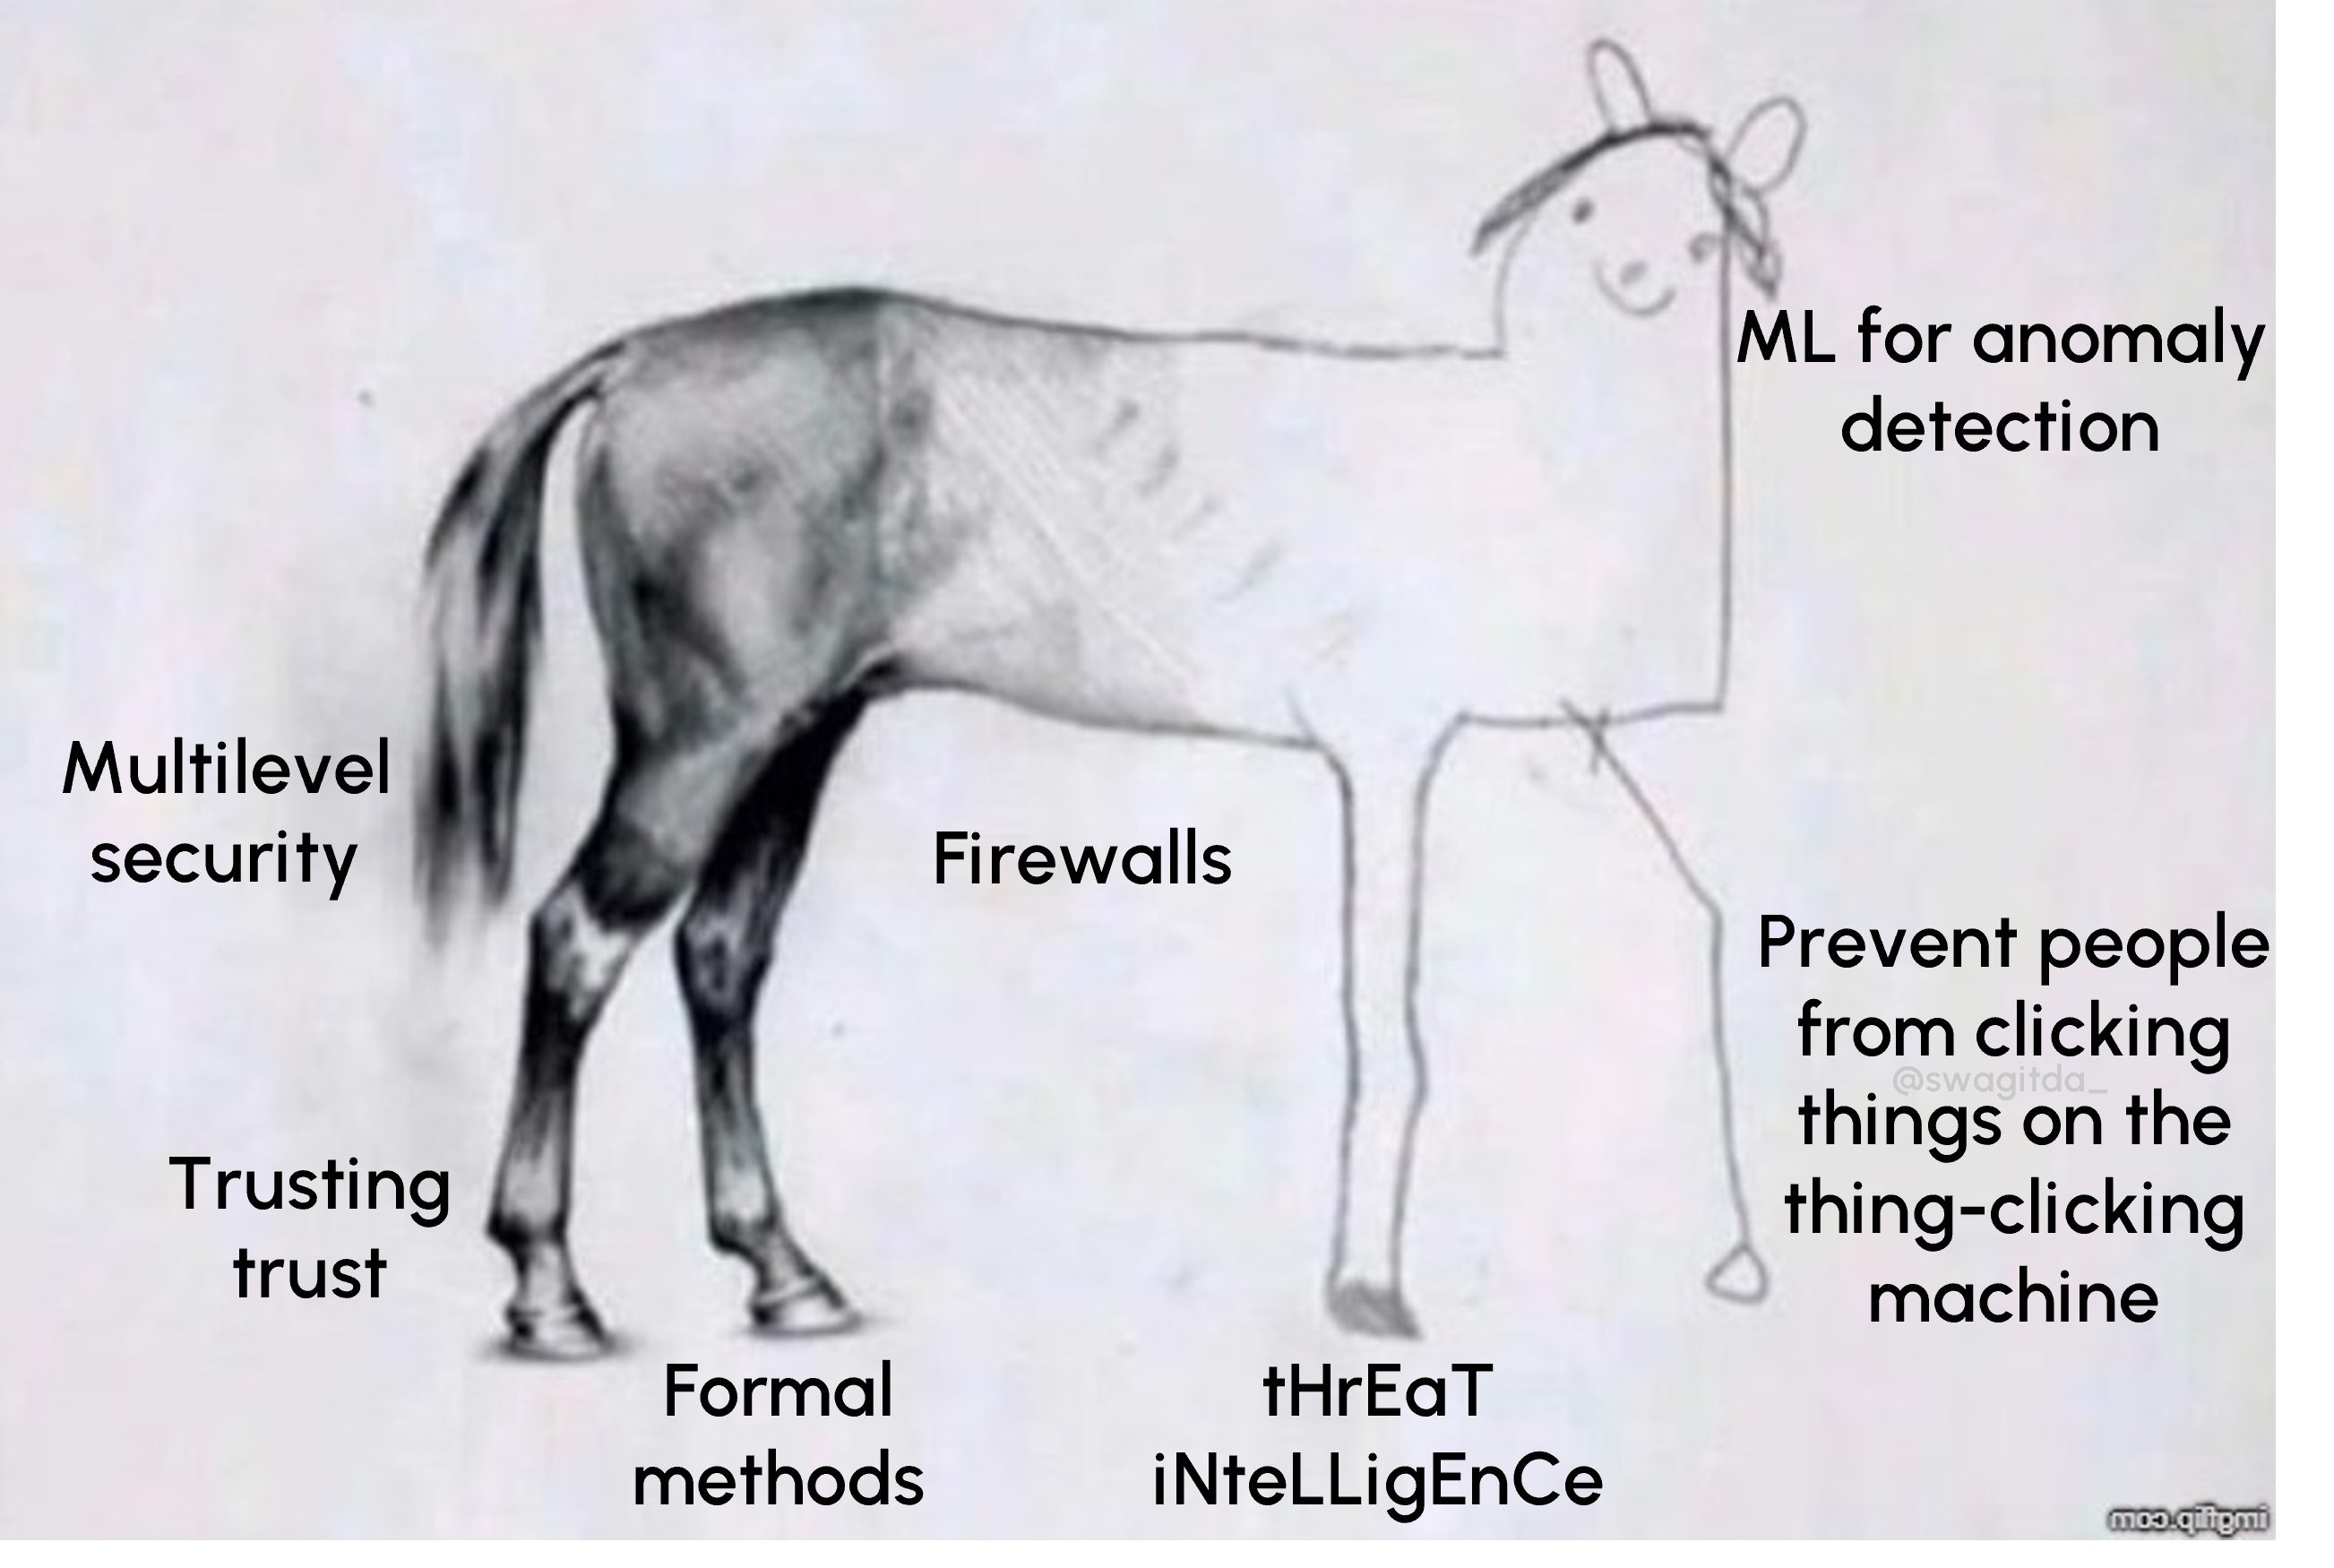 The horse sketch meme adapted by yours truly to illustrate the sad intellectual decline of the cybersecurity industry. The well-drawn end of the horse starts with the labels multilevel security, trusting trust, and formal methods. As the drawing gets progressively worse, the labels are firewalls, threat intelligence, and, once we reach the level of stick figure, the labels are machine learning for anomaly detection, and “prevent people from clicking things on the thing-clicking machine."